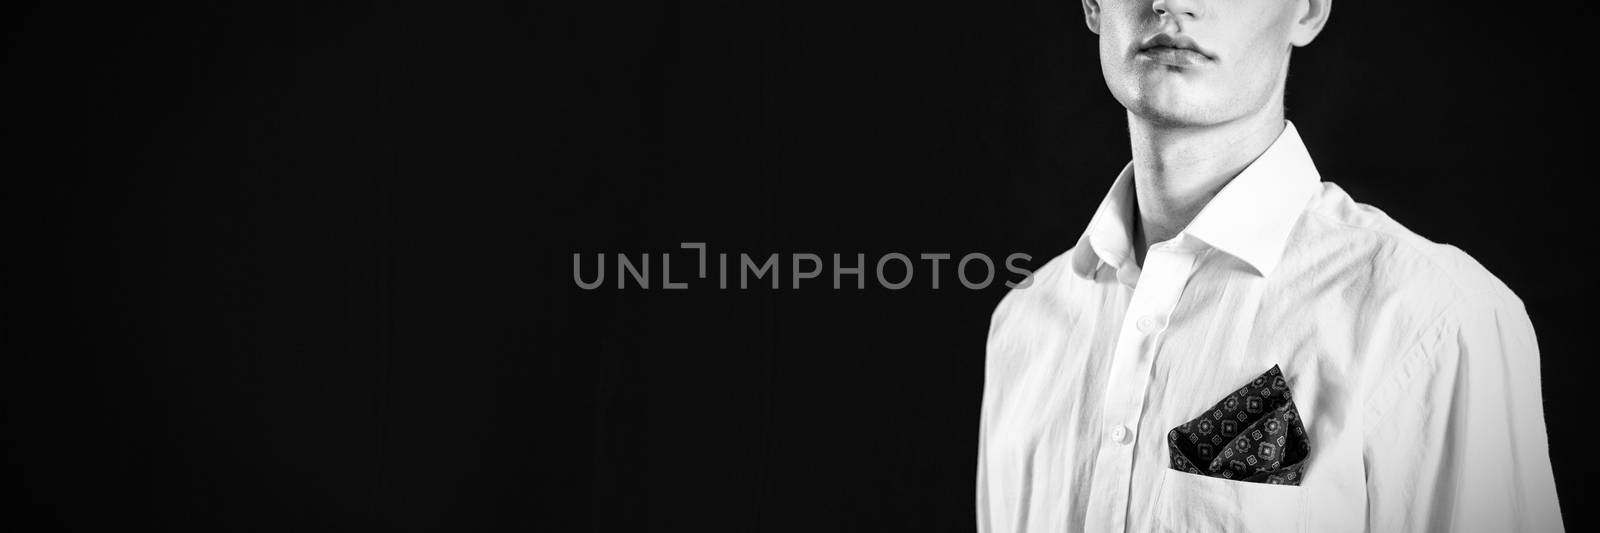 Androgynous man looking at camera against black background